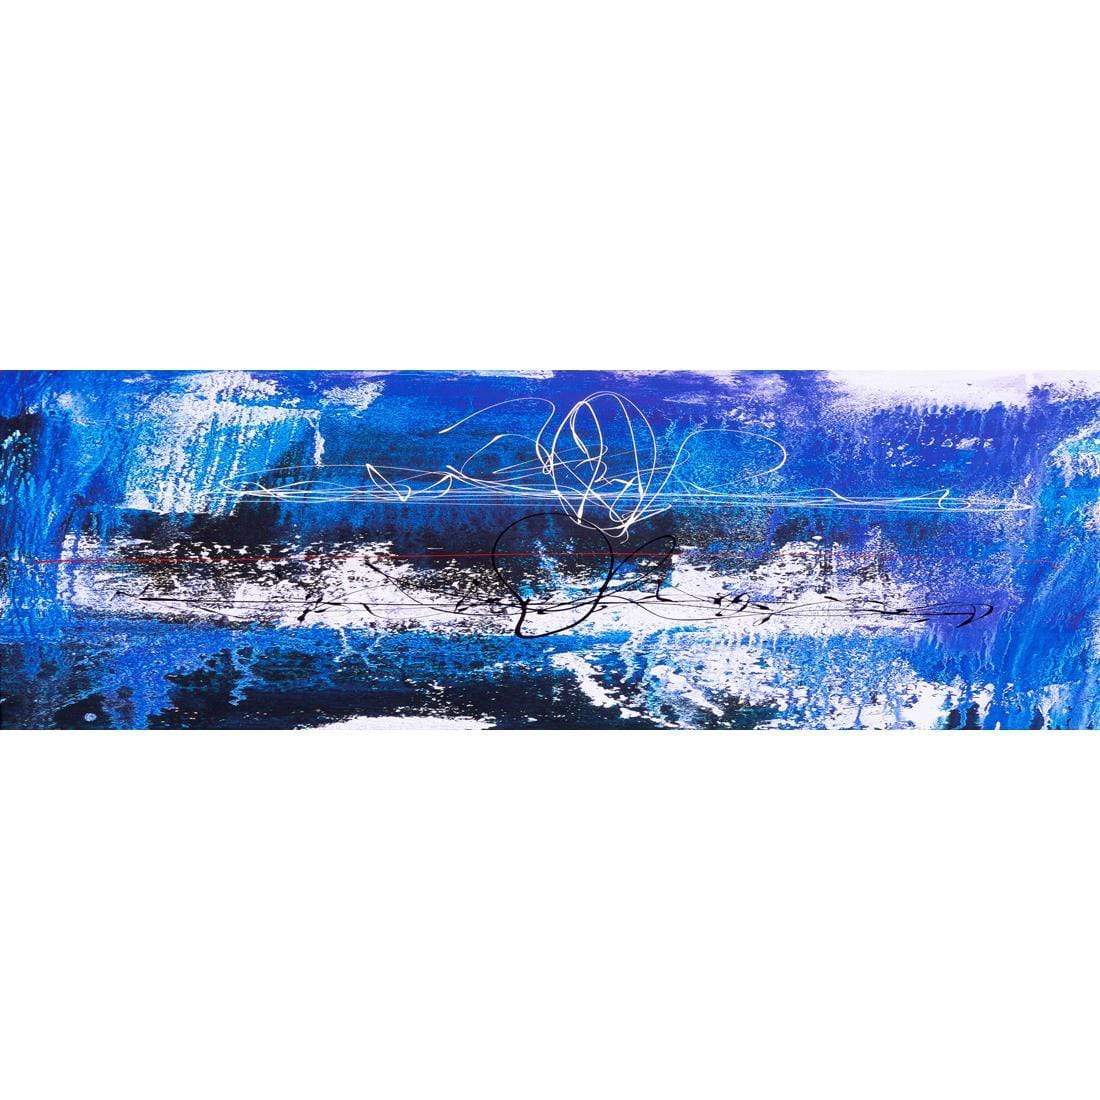 Fire, Blue (Long) with Enhanced black, red and white Canvas Art